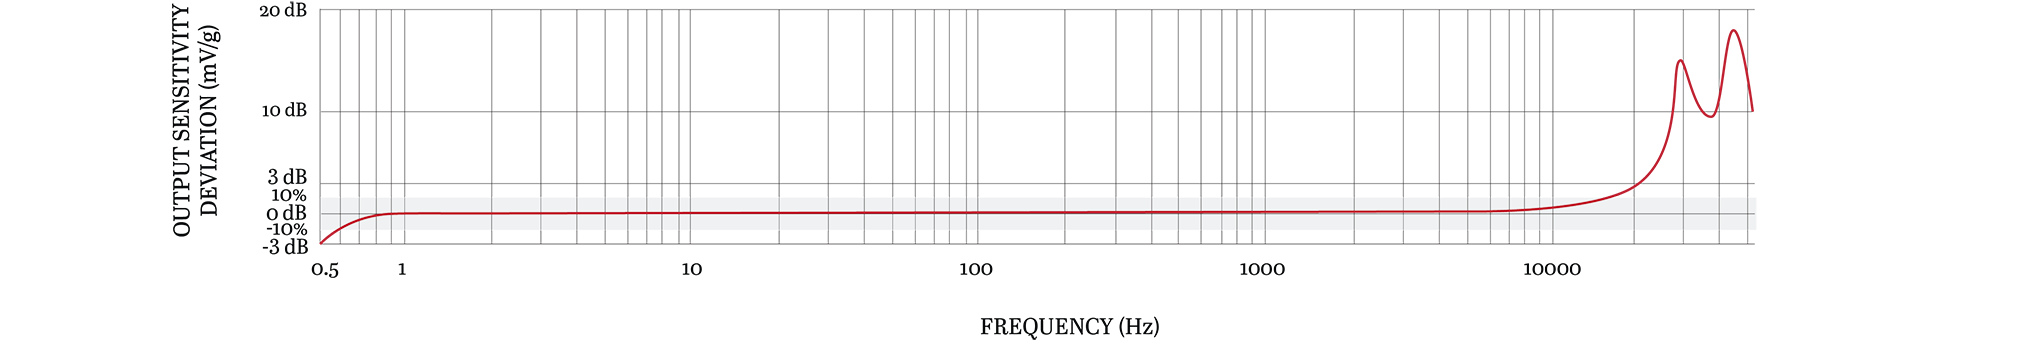 A line graph showing the frequency resopnse of a CTC UEB332 condition monitoring sensor.